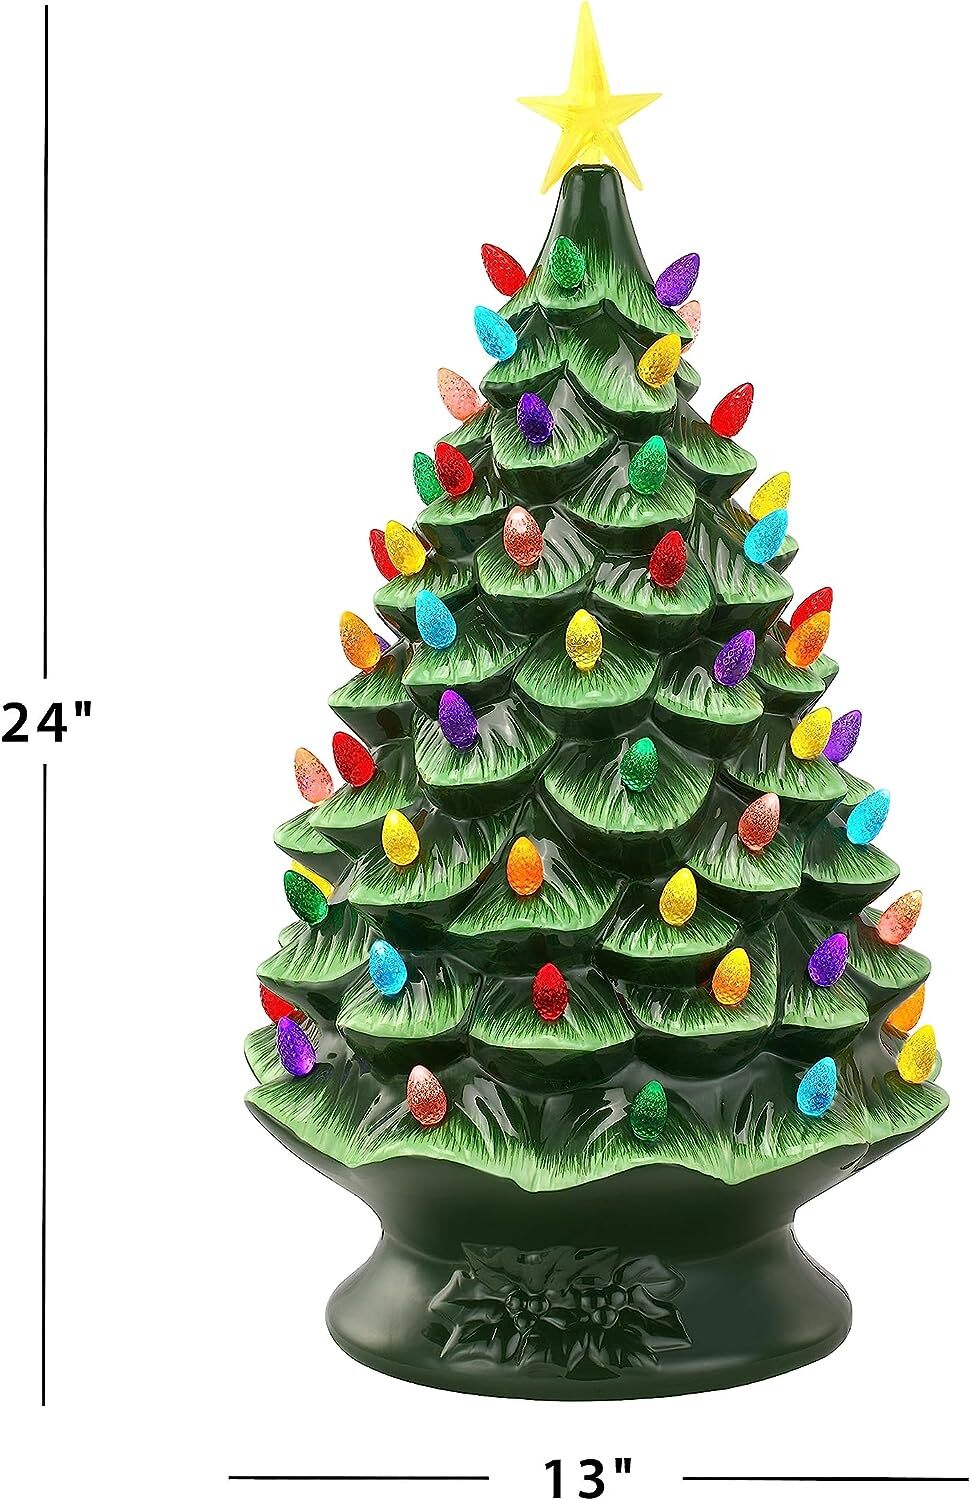 Mr. Christmas Nostalgic Ceramic Christmas Tree with LED Lights Indoor Decoration, 24 Inches, Pink